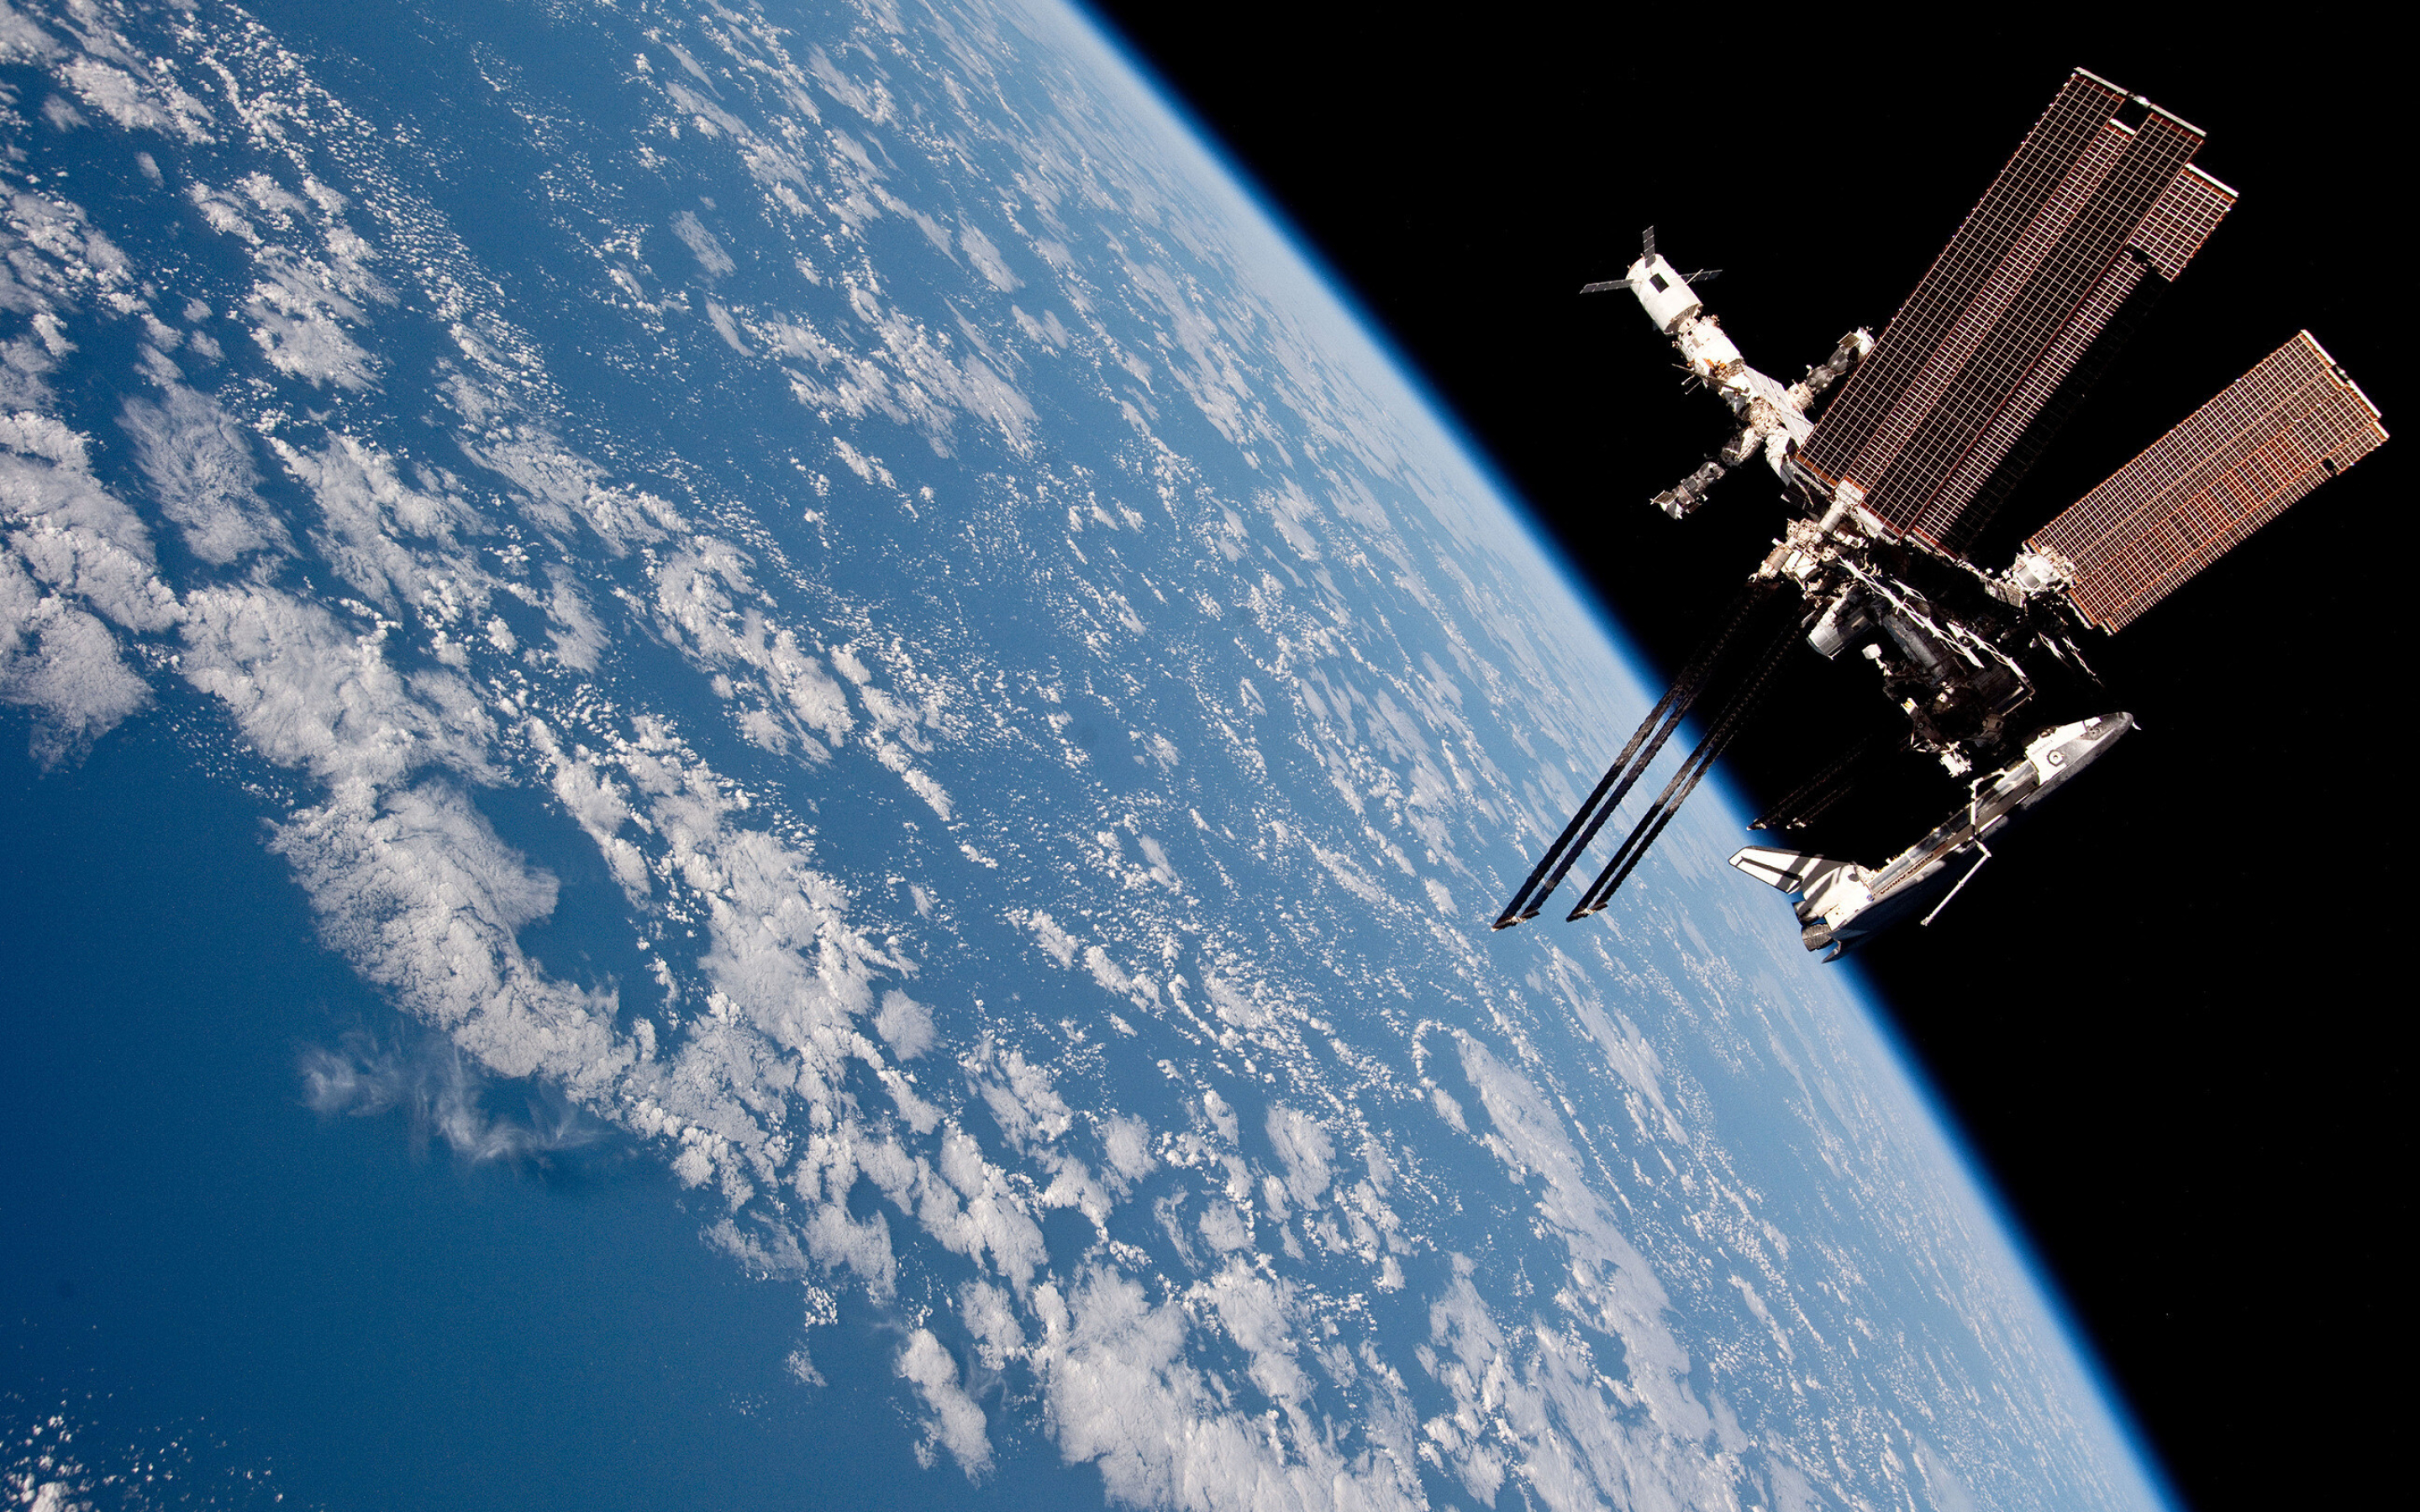 ISS: International Space Station, The largest satellite in low Earth orbit. 2880x1800 HD Wallpaper.